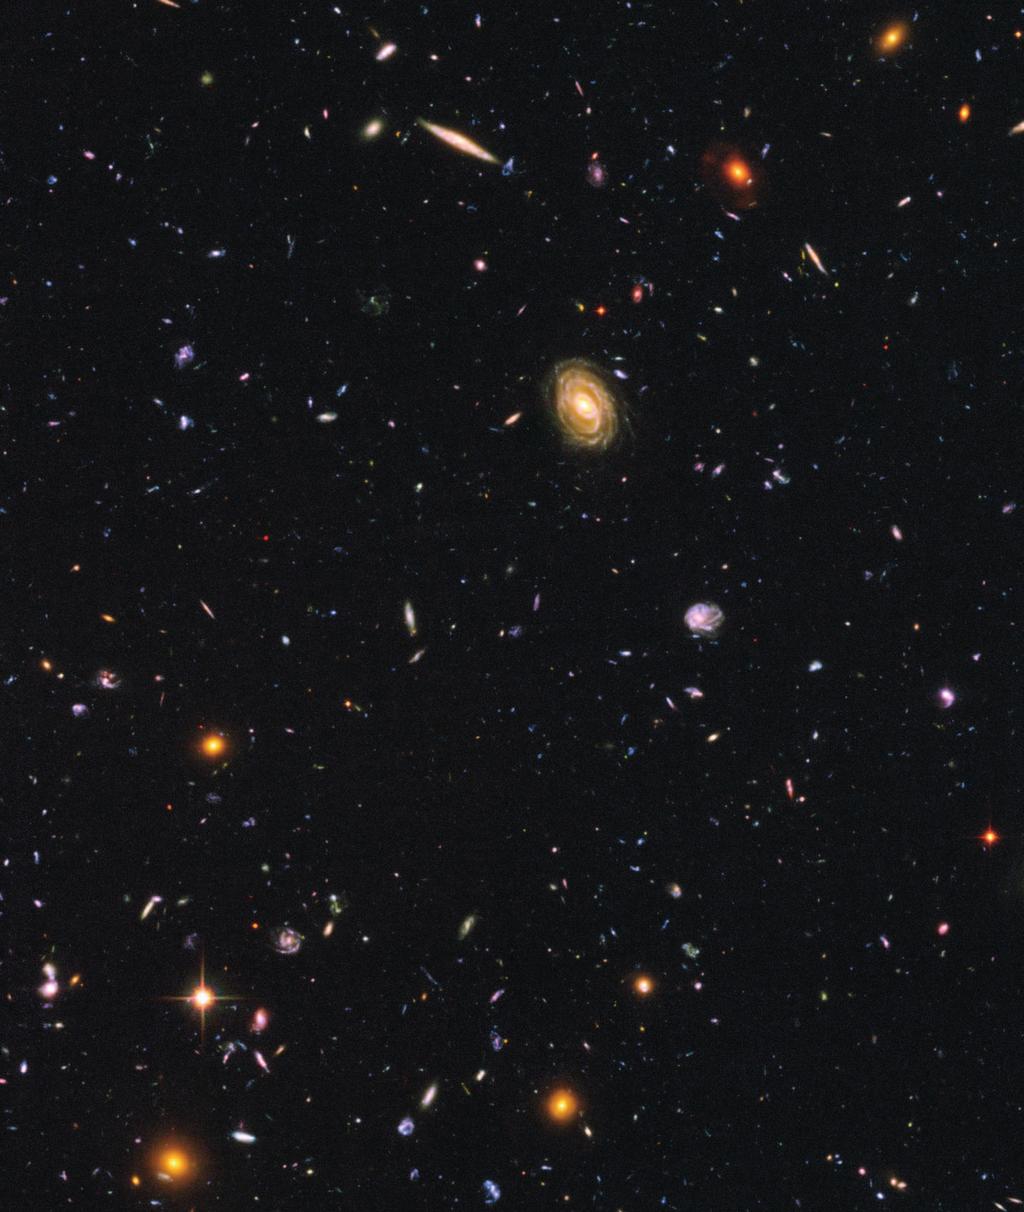 The Hubble Ultra Deep Field from 2004 represents the deepest portrait of the visible Universe yet achieved by mankind.